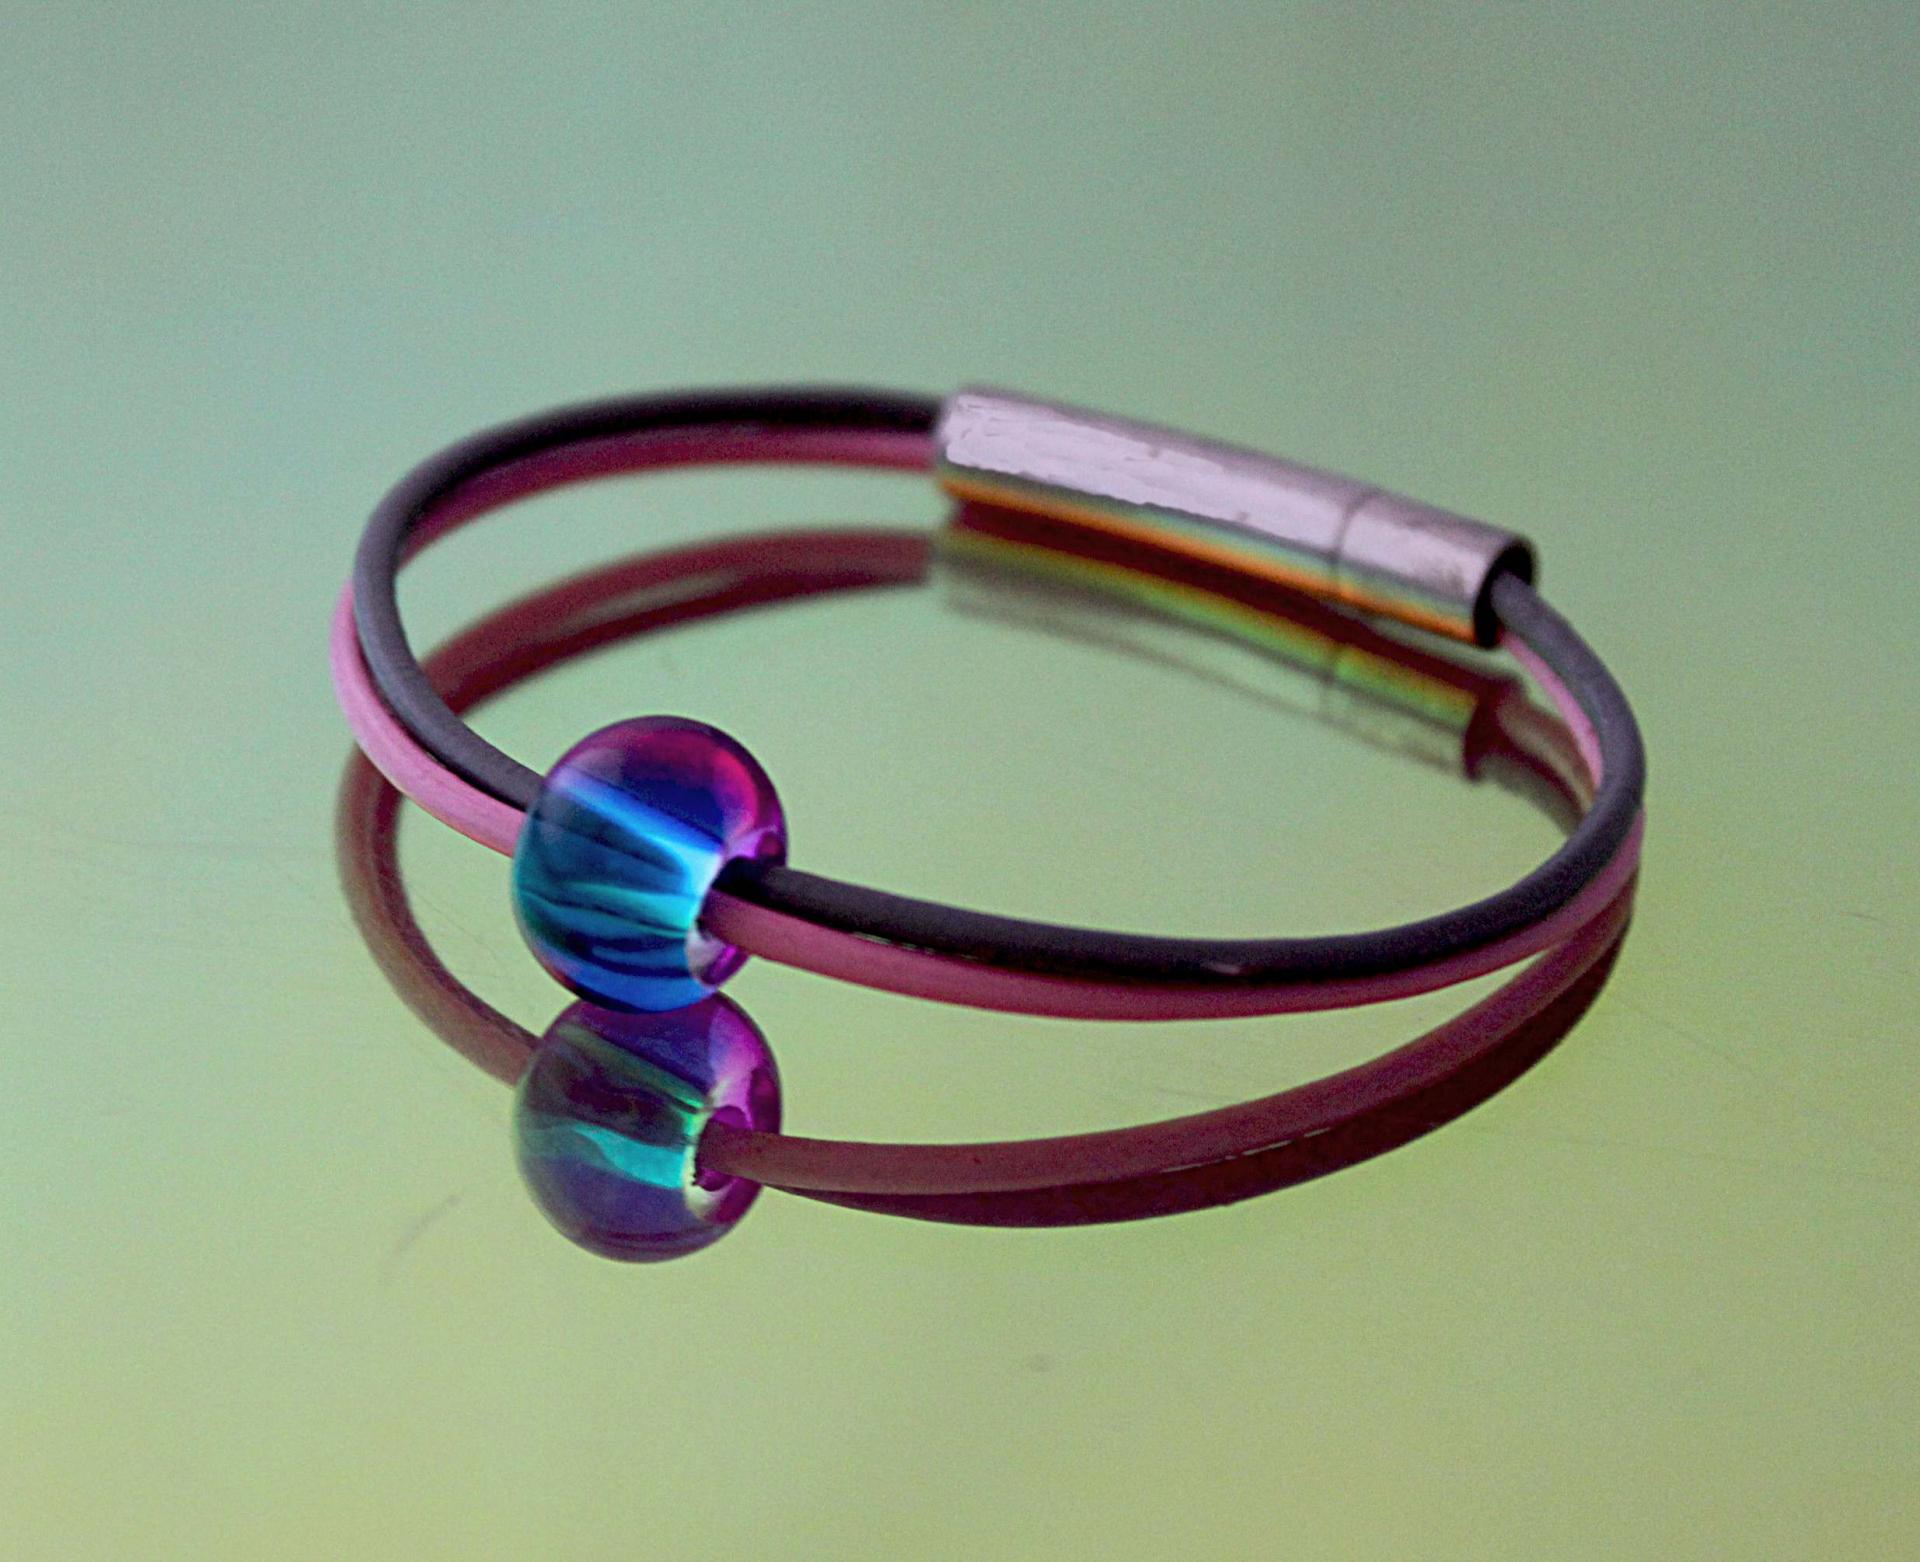 Chic Pink & Grey leather Bracelet with Bright Captive Bead